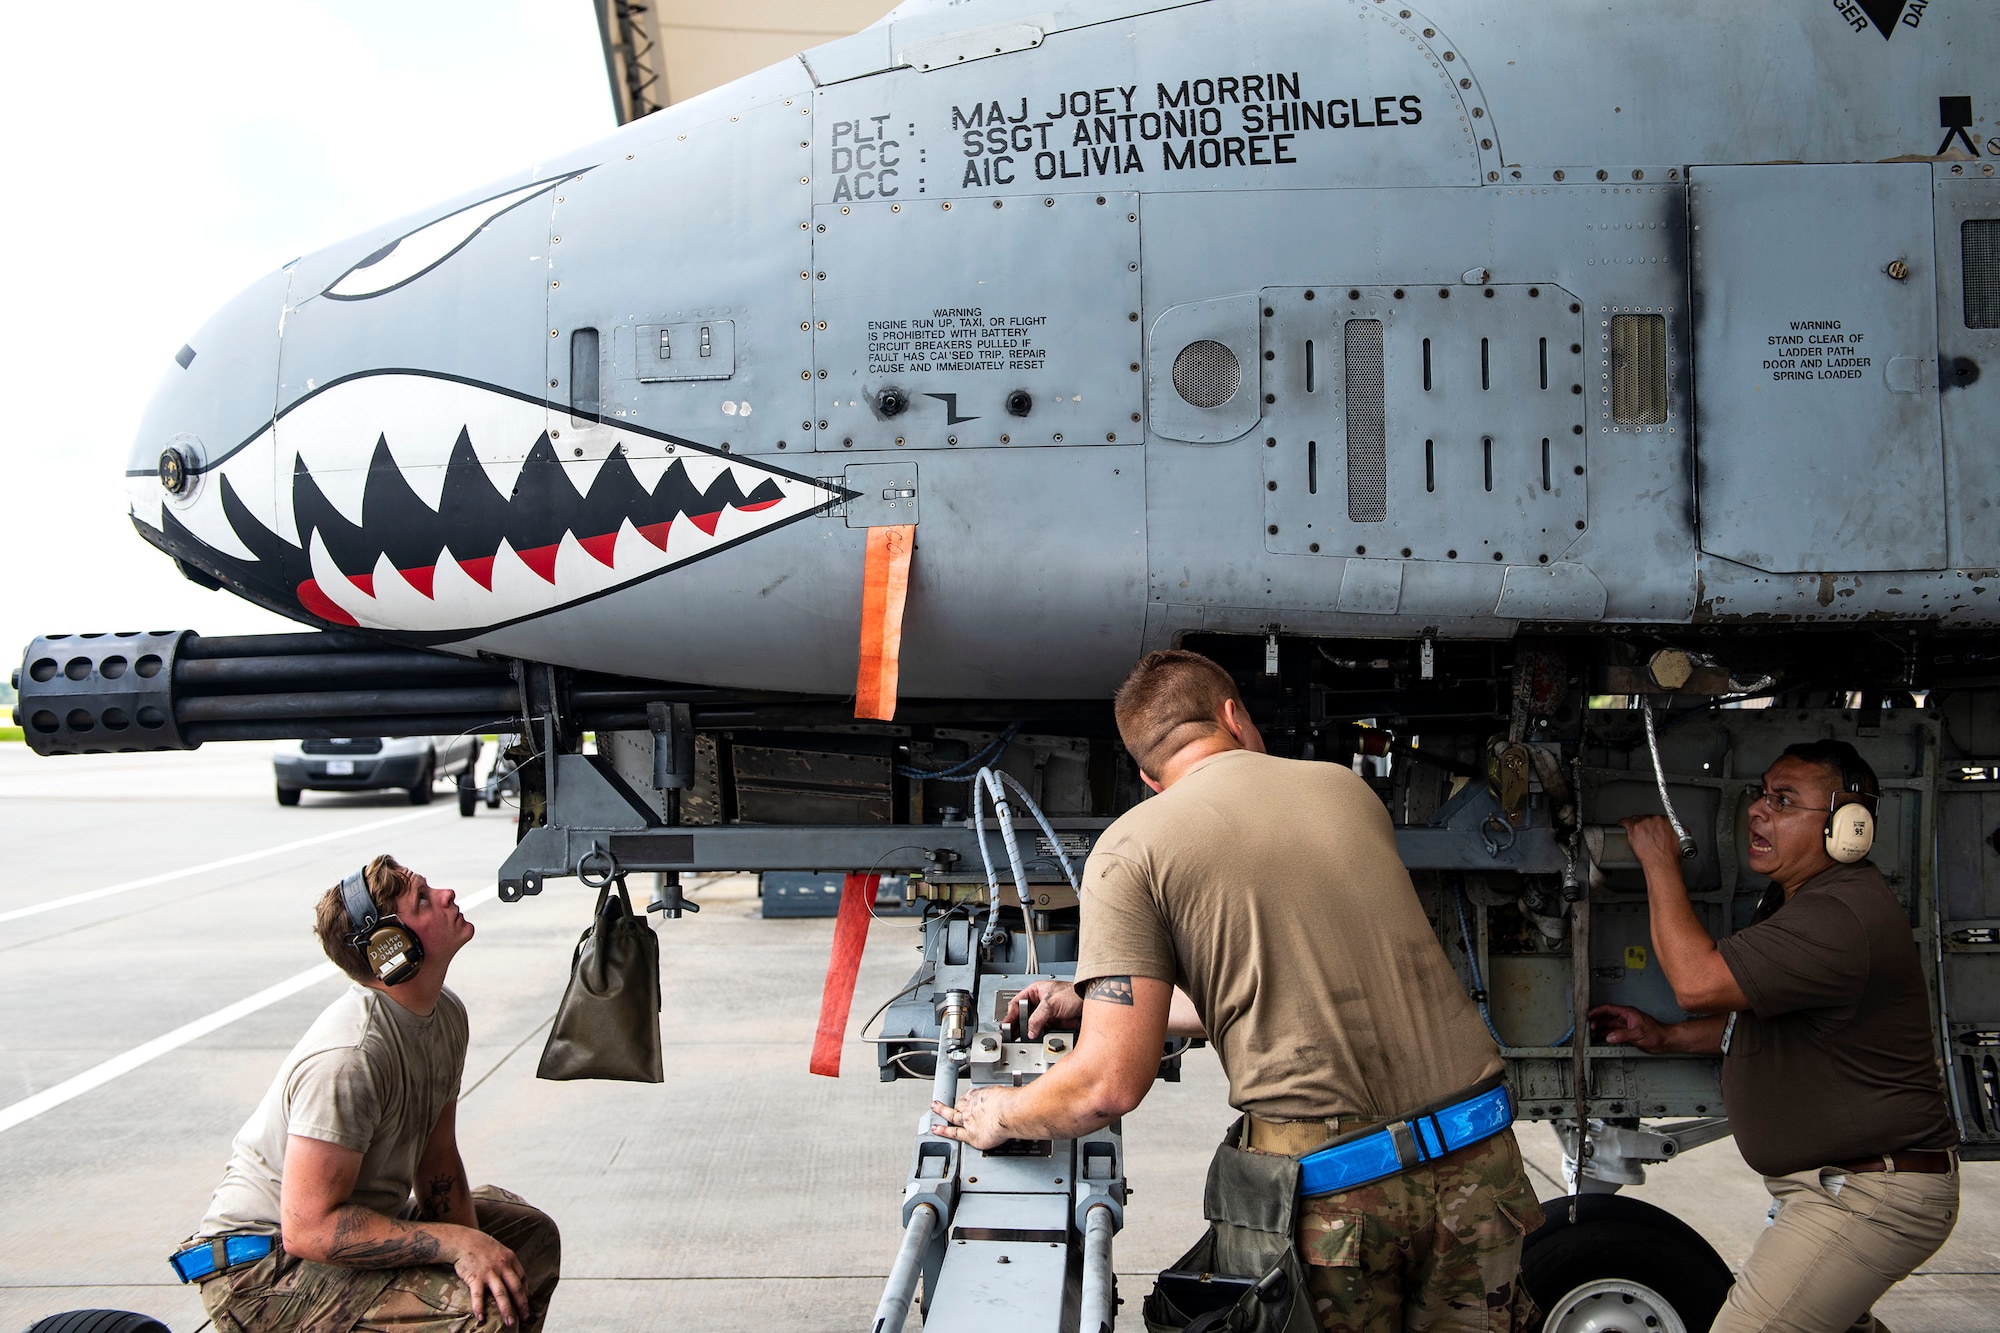 Airmen from the 74th Aircraft Maintenance Unit lower a 30mm GAU-8 Gatling Gun system during unscheduled maintenance, July 23, 2019, at Moody Air Force Base, Ga. Unscheduled maintenance occurs when discrepancies are discovered with A-10C Thunderbolt II weapon systems. These repairs aid in reducing down time of the aircraft and supporting sustained operations tempo. (U.S. Air Force photo by Senior Airman Erick Requadt)